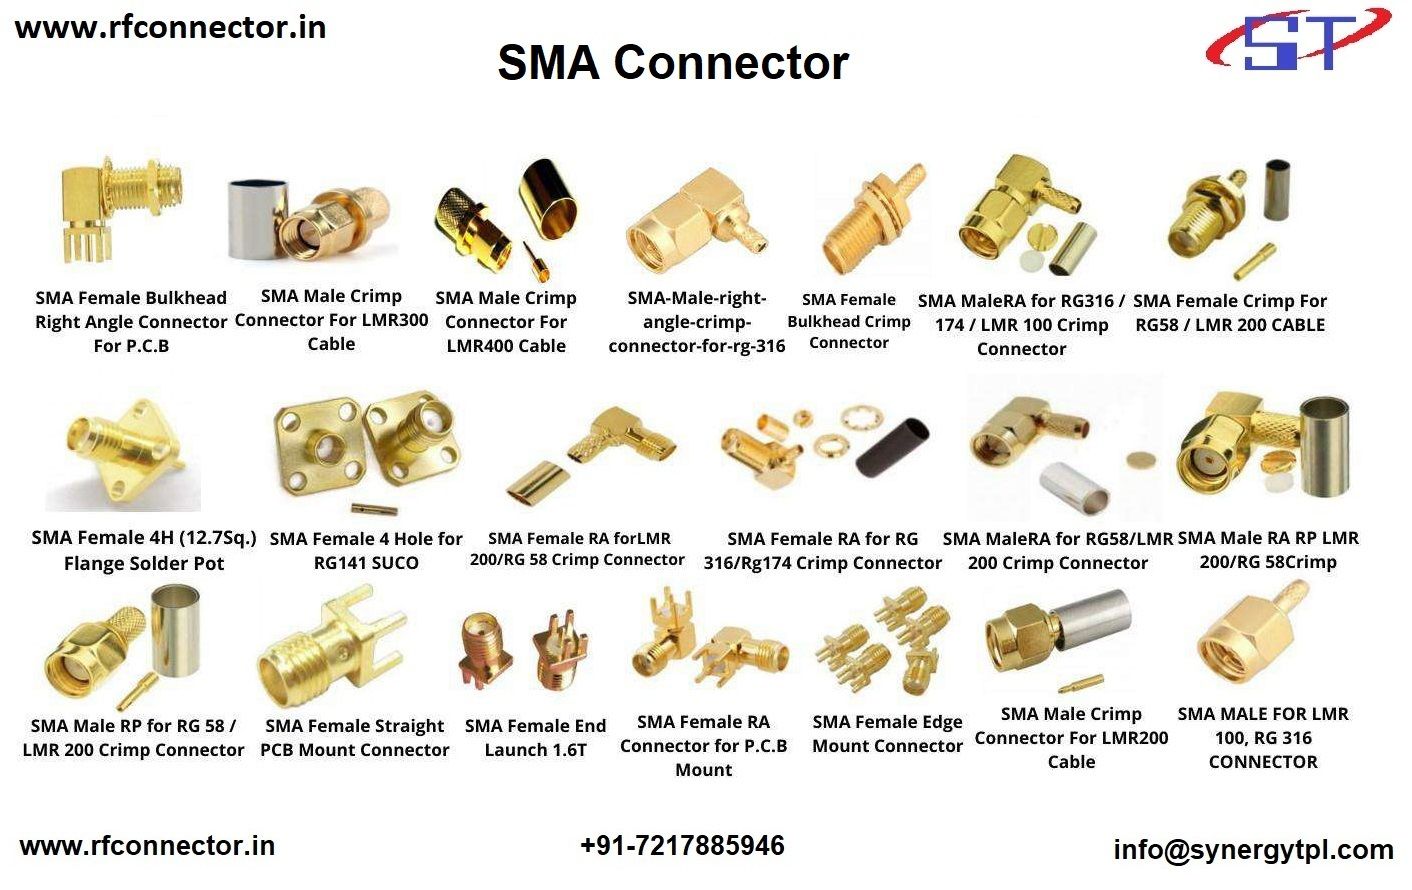 SMA male right angle clamp connector for LMR 400 cable